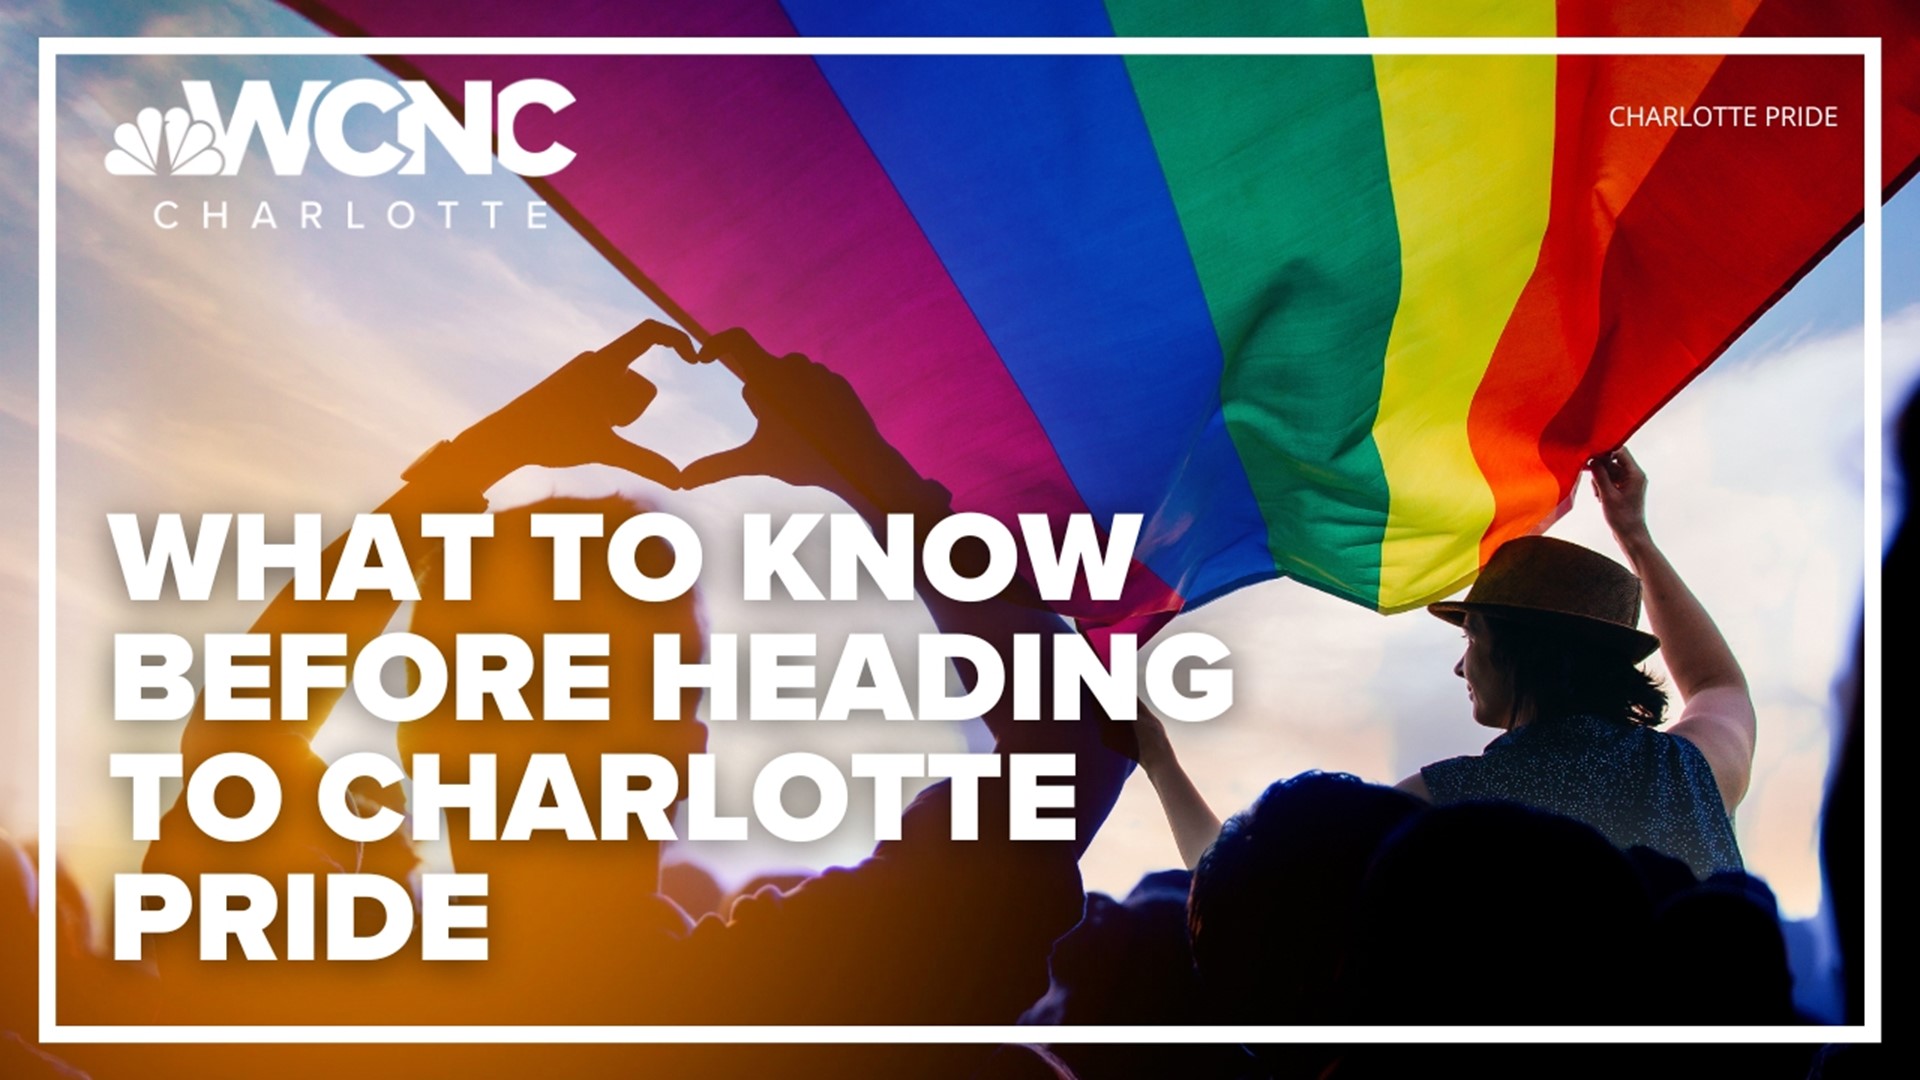 Charlotte Pride is celebrating its 20th anniversary in Charlotte this weekend.